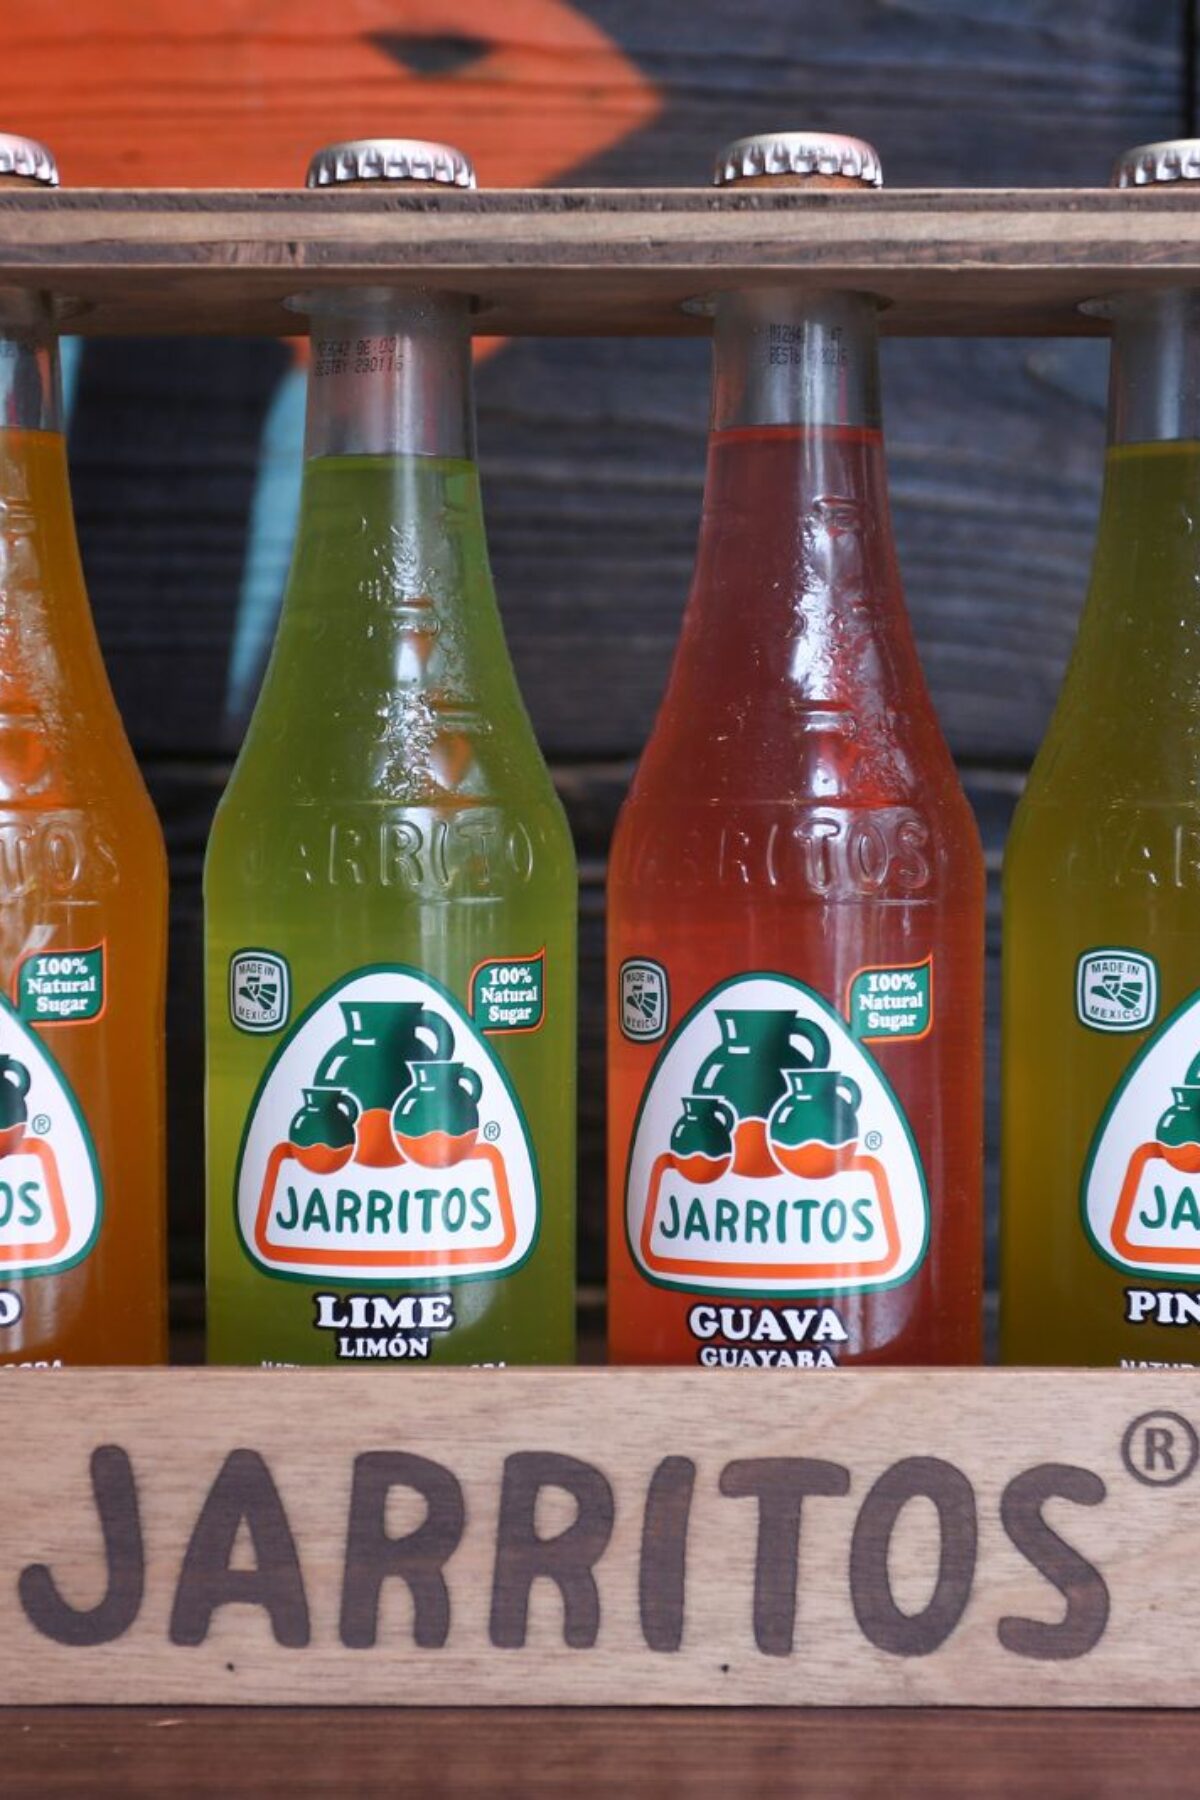 --CALIMEX-- This image shows bottle of Jarritos drinks at Calimex Mexican restaurant in Hong Kong. 10APR15 [30APRIL2015 LEAD FEATURE 1 48HRS]] (Photo by Jonathan Wong/South China Morning Post via Getty Images)